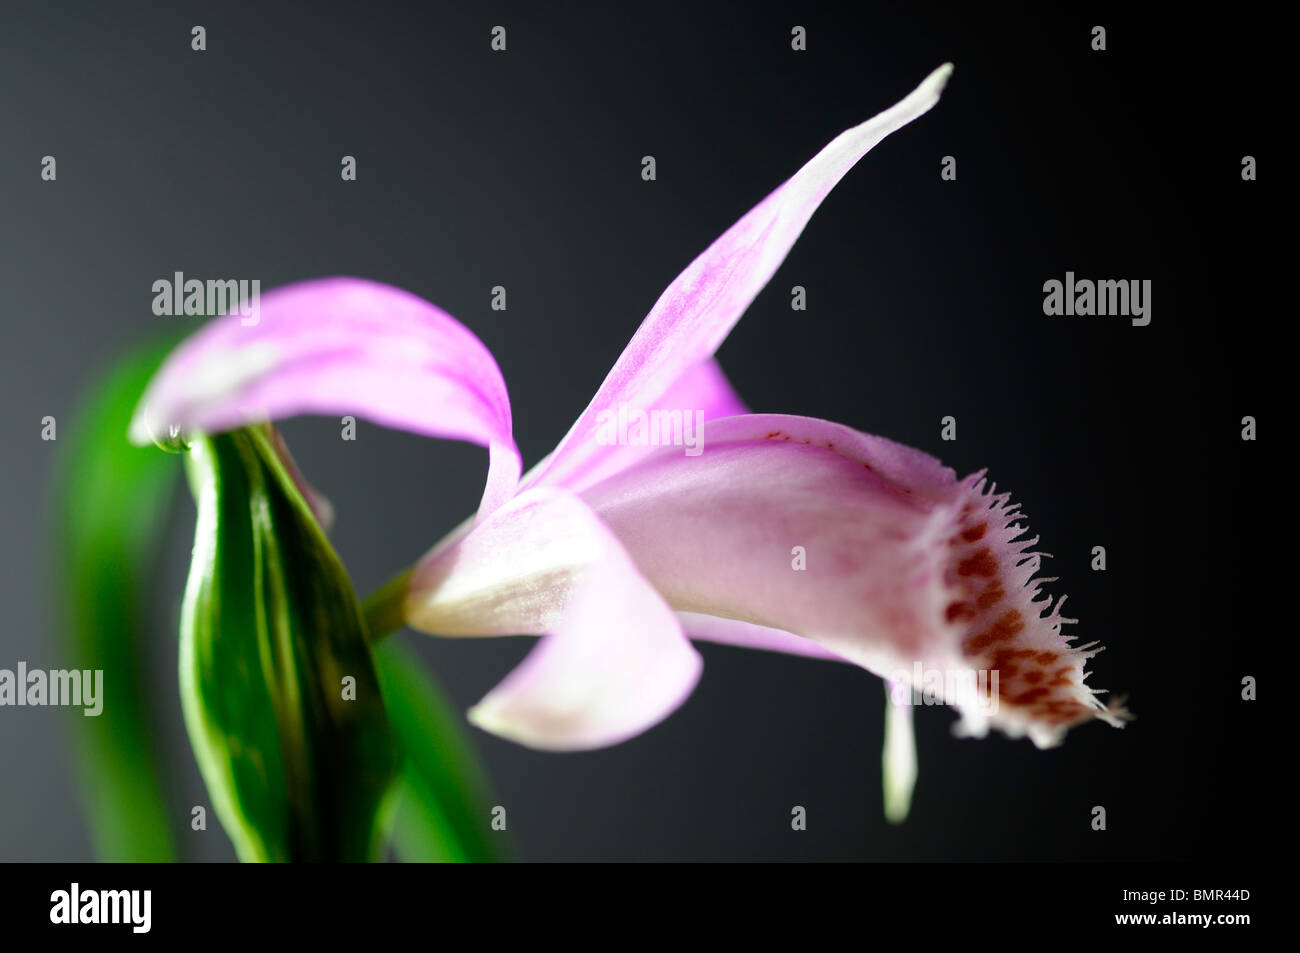 Pleione muriel turner windowsill orchid flower plant pink purple set contrast contrasted black background Stock Photo